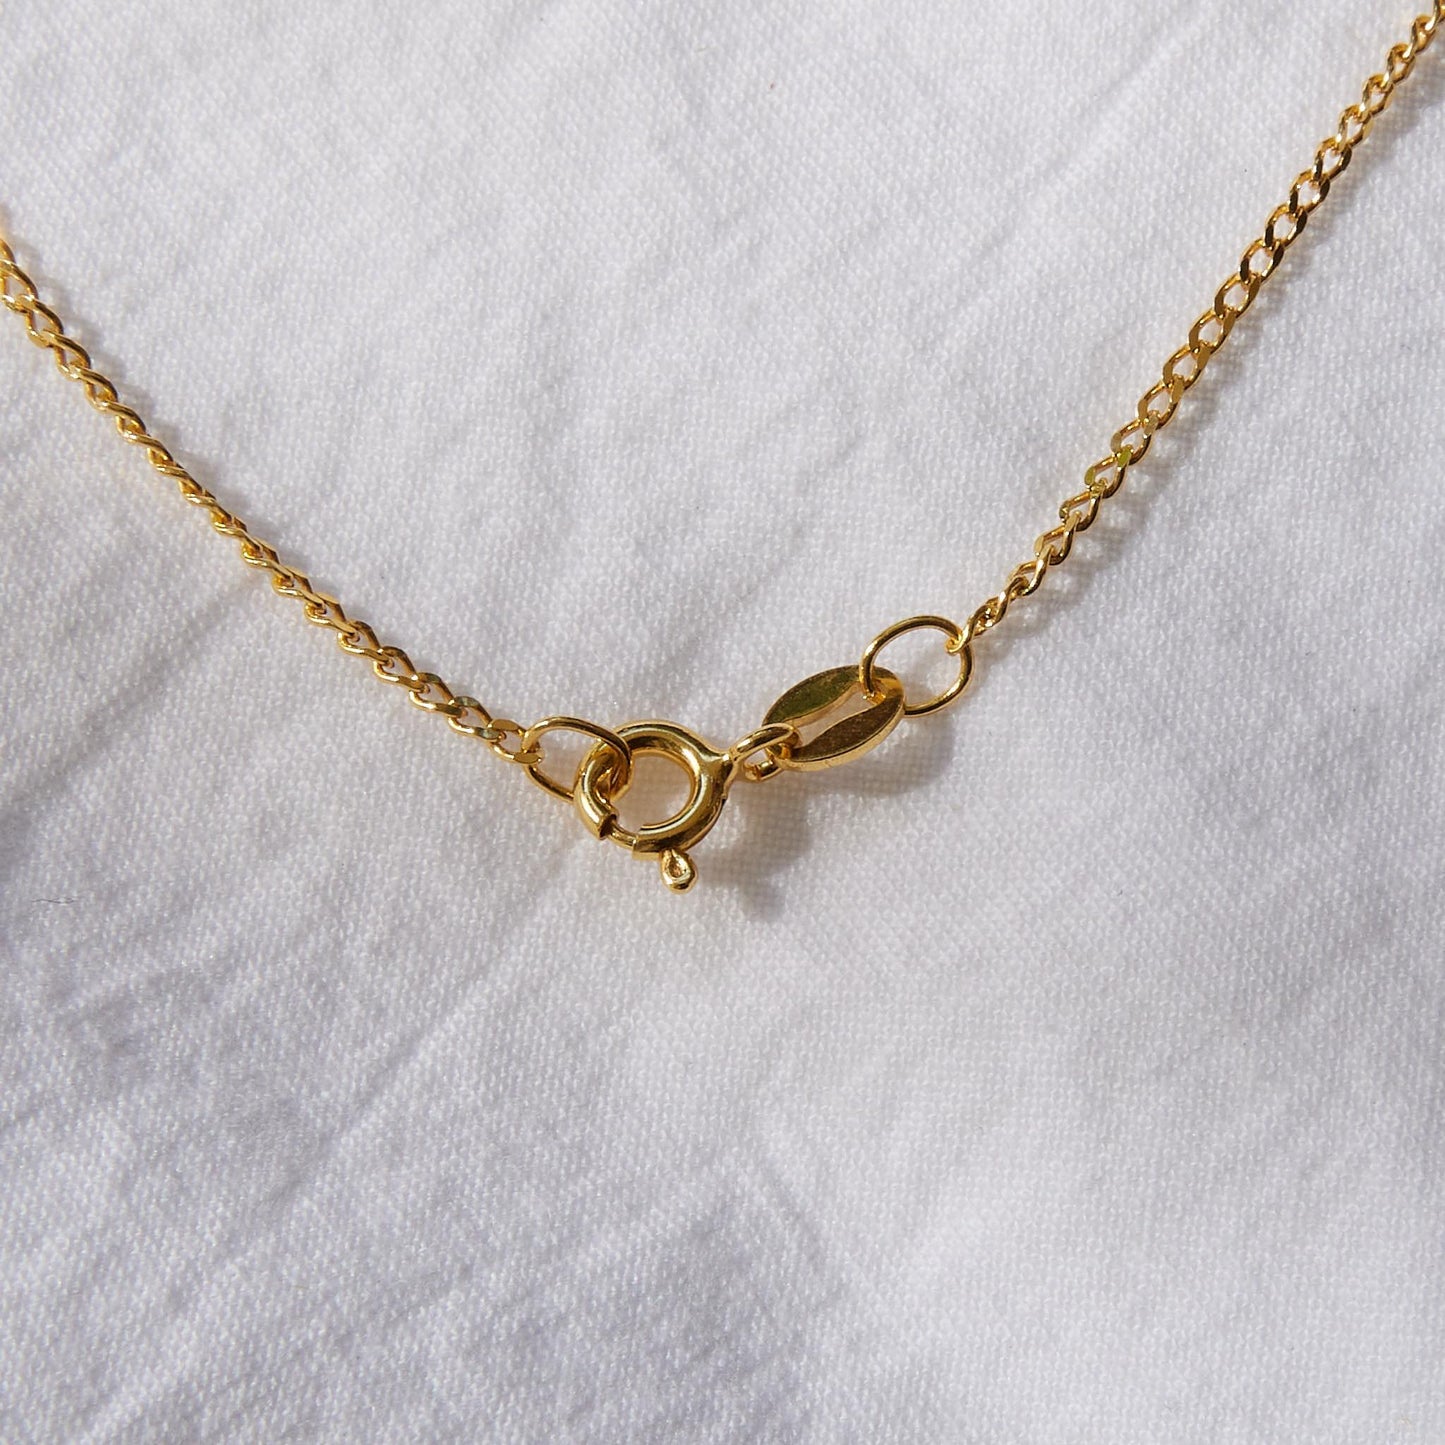 Wave pendant on 24k Gold plated necklace